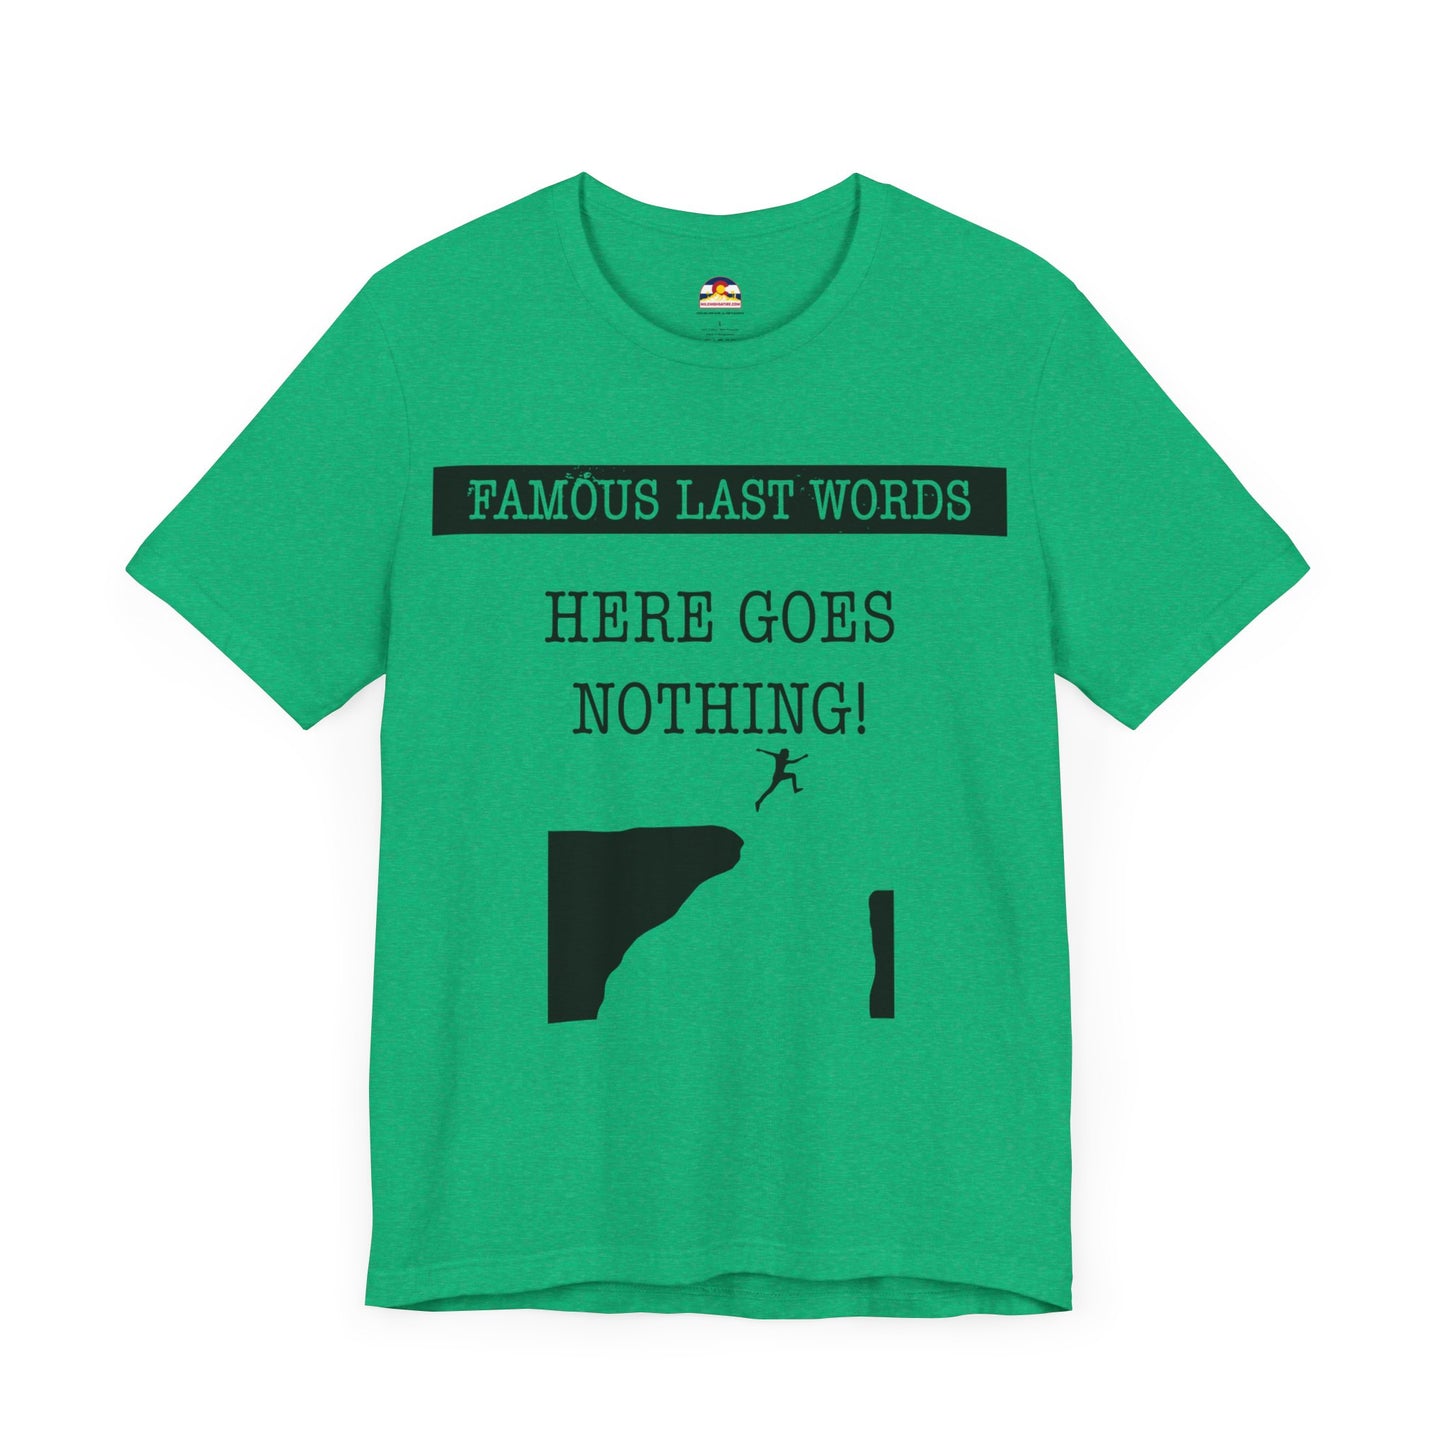 FLW "Here Goes Nothing!" T-Shirt